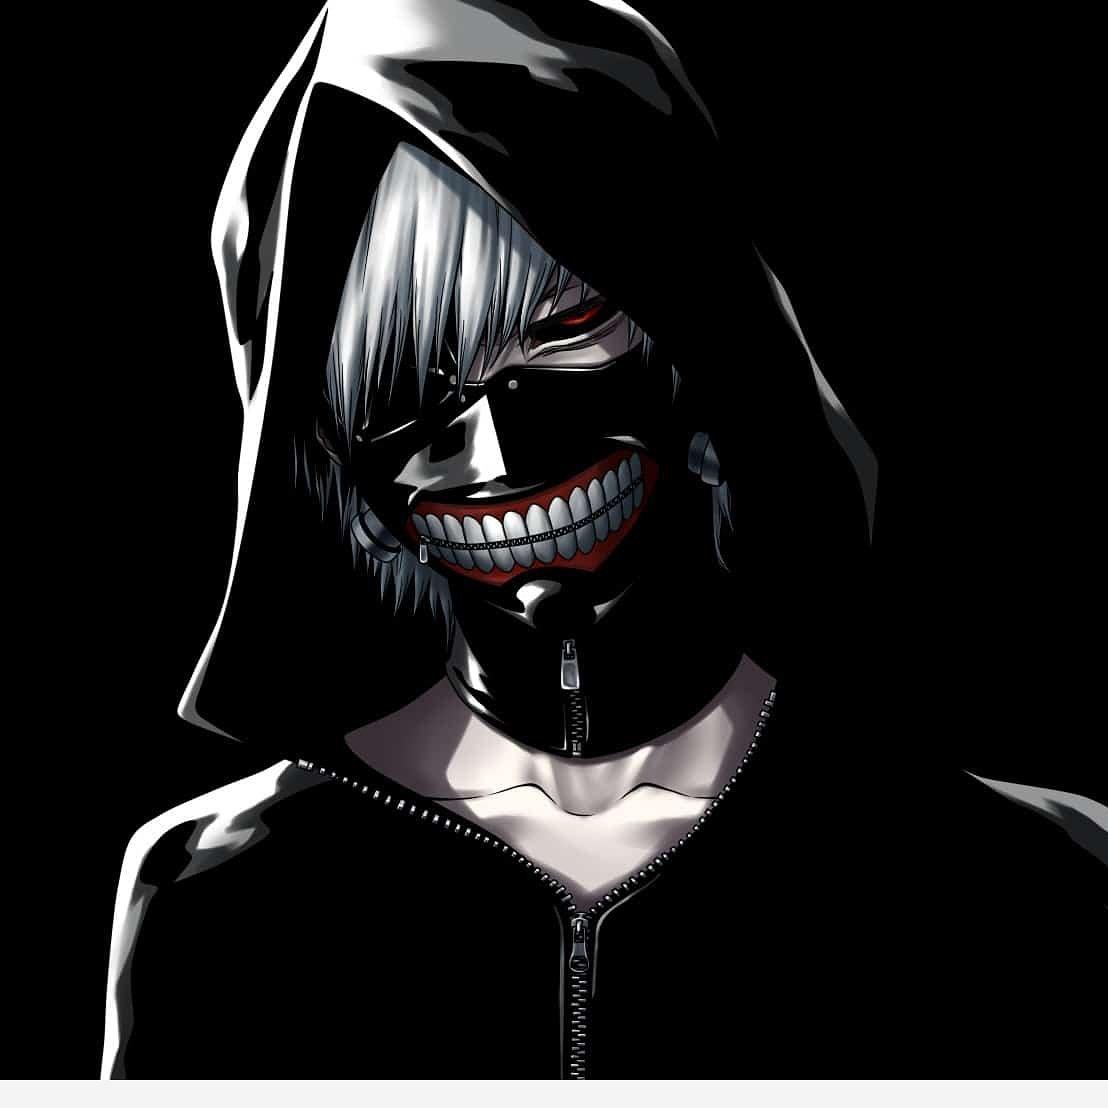 Anime Daily morning Tokyo ghoul #anime